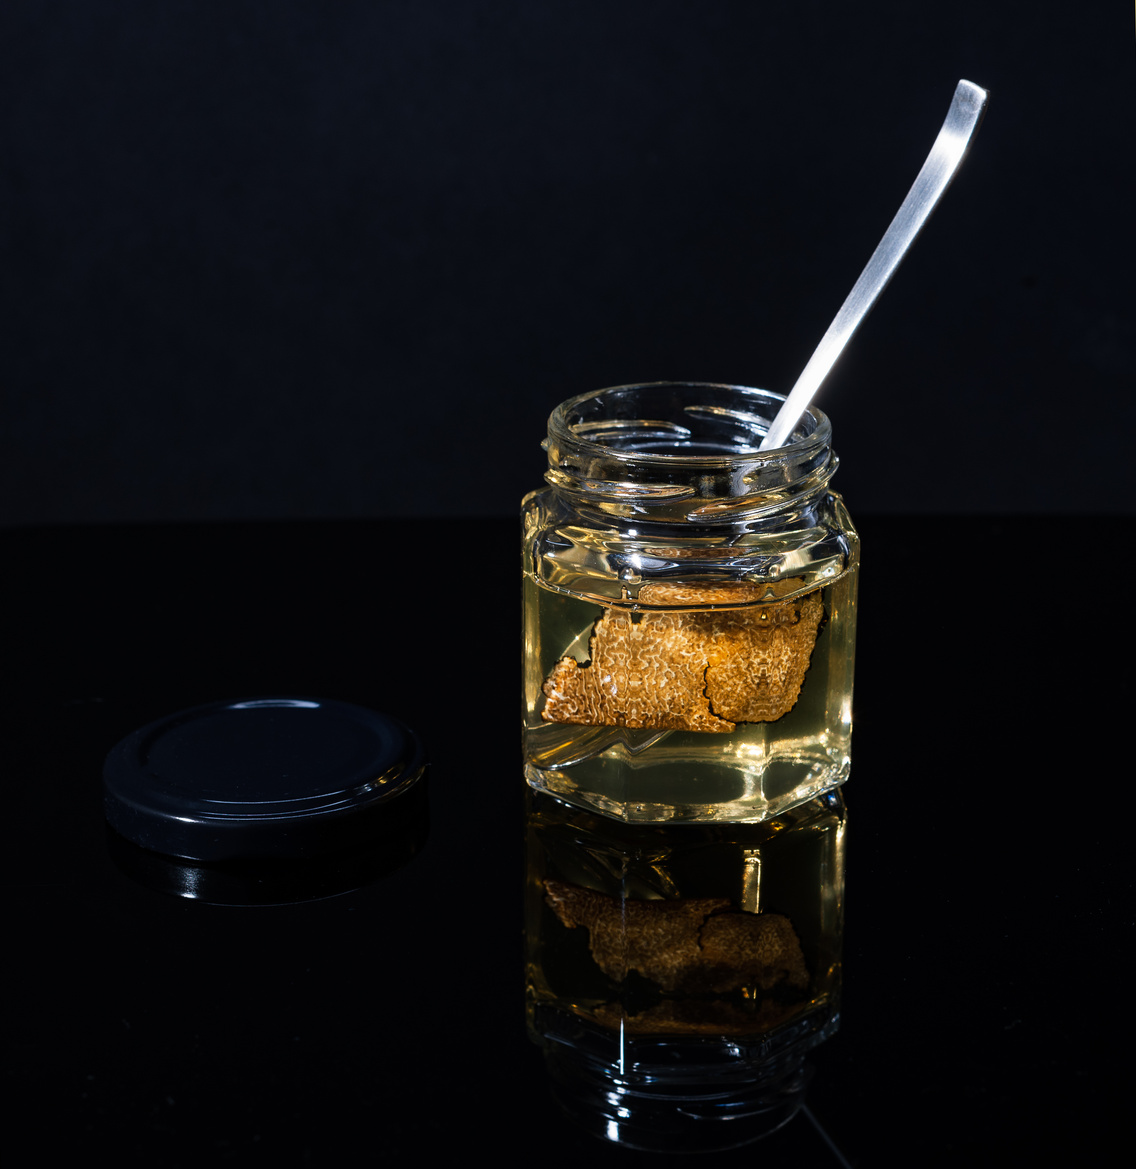 truffle mushroom in a jar of honey on a black background. Minimalism in composition. Luxury food. Free space for text.